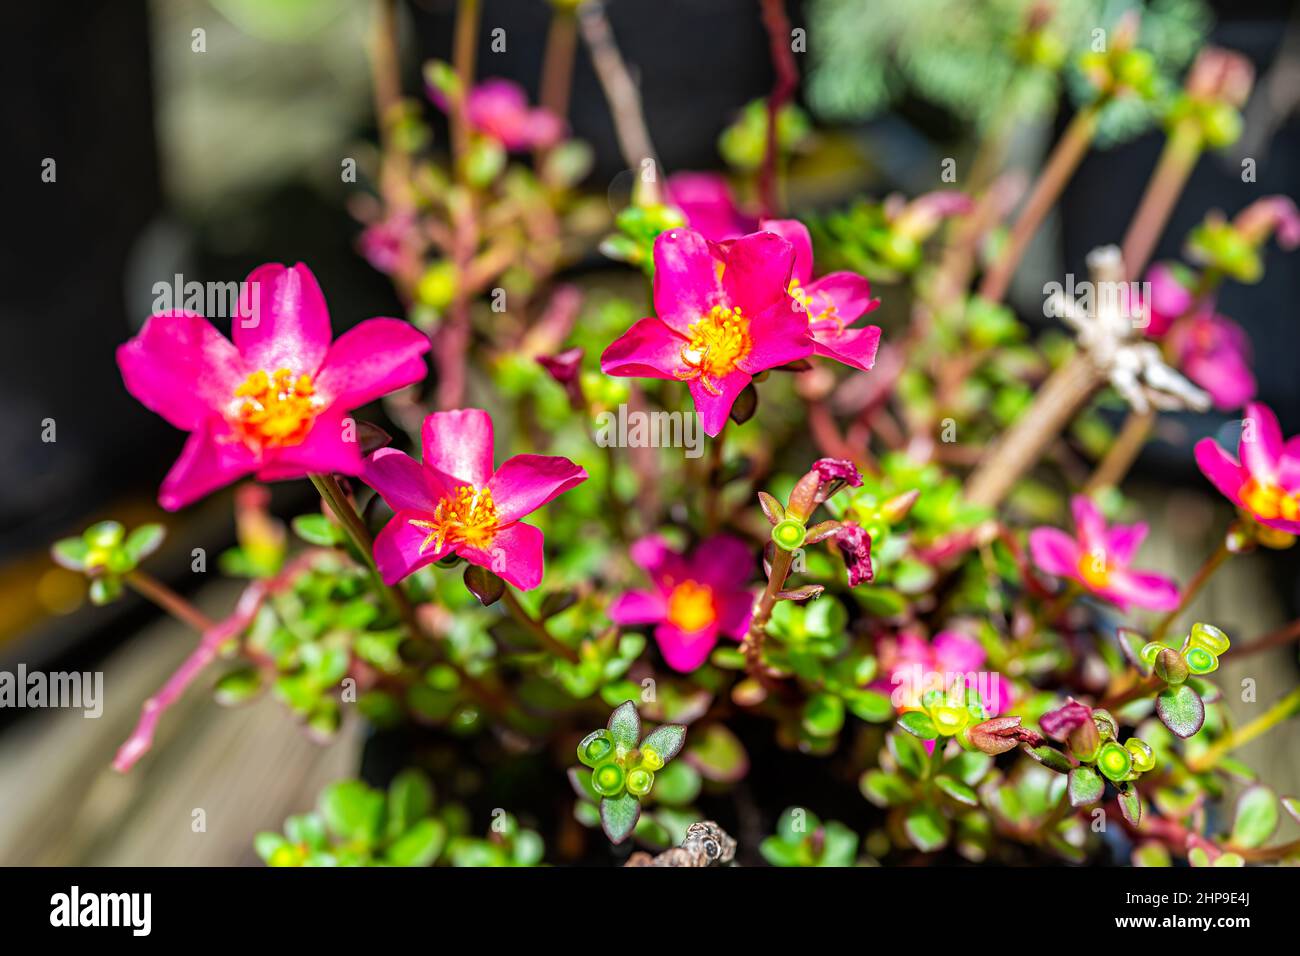 Closeup of green succulent leaves and pink purple flowers of edible purslane plant in pot flowerpot outside blooming in garden sunlight Stock Photo